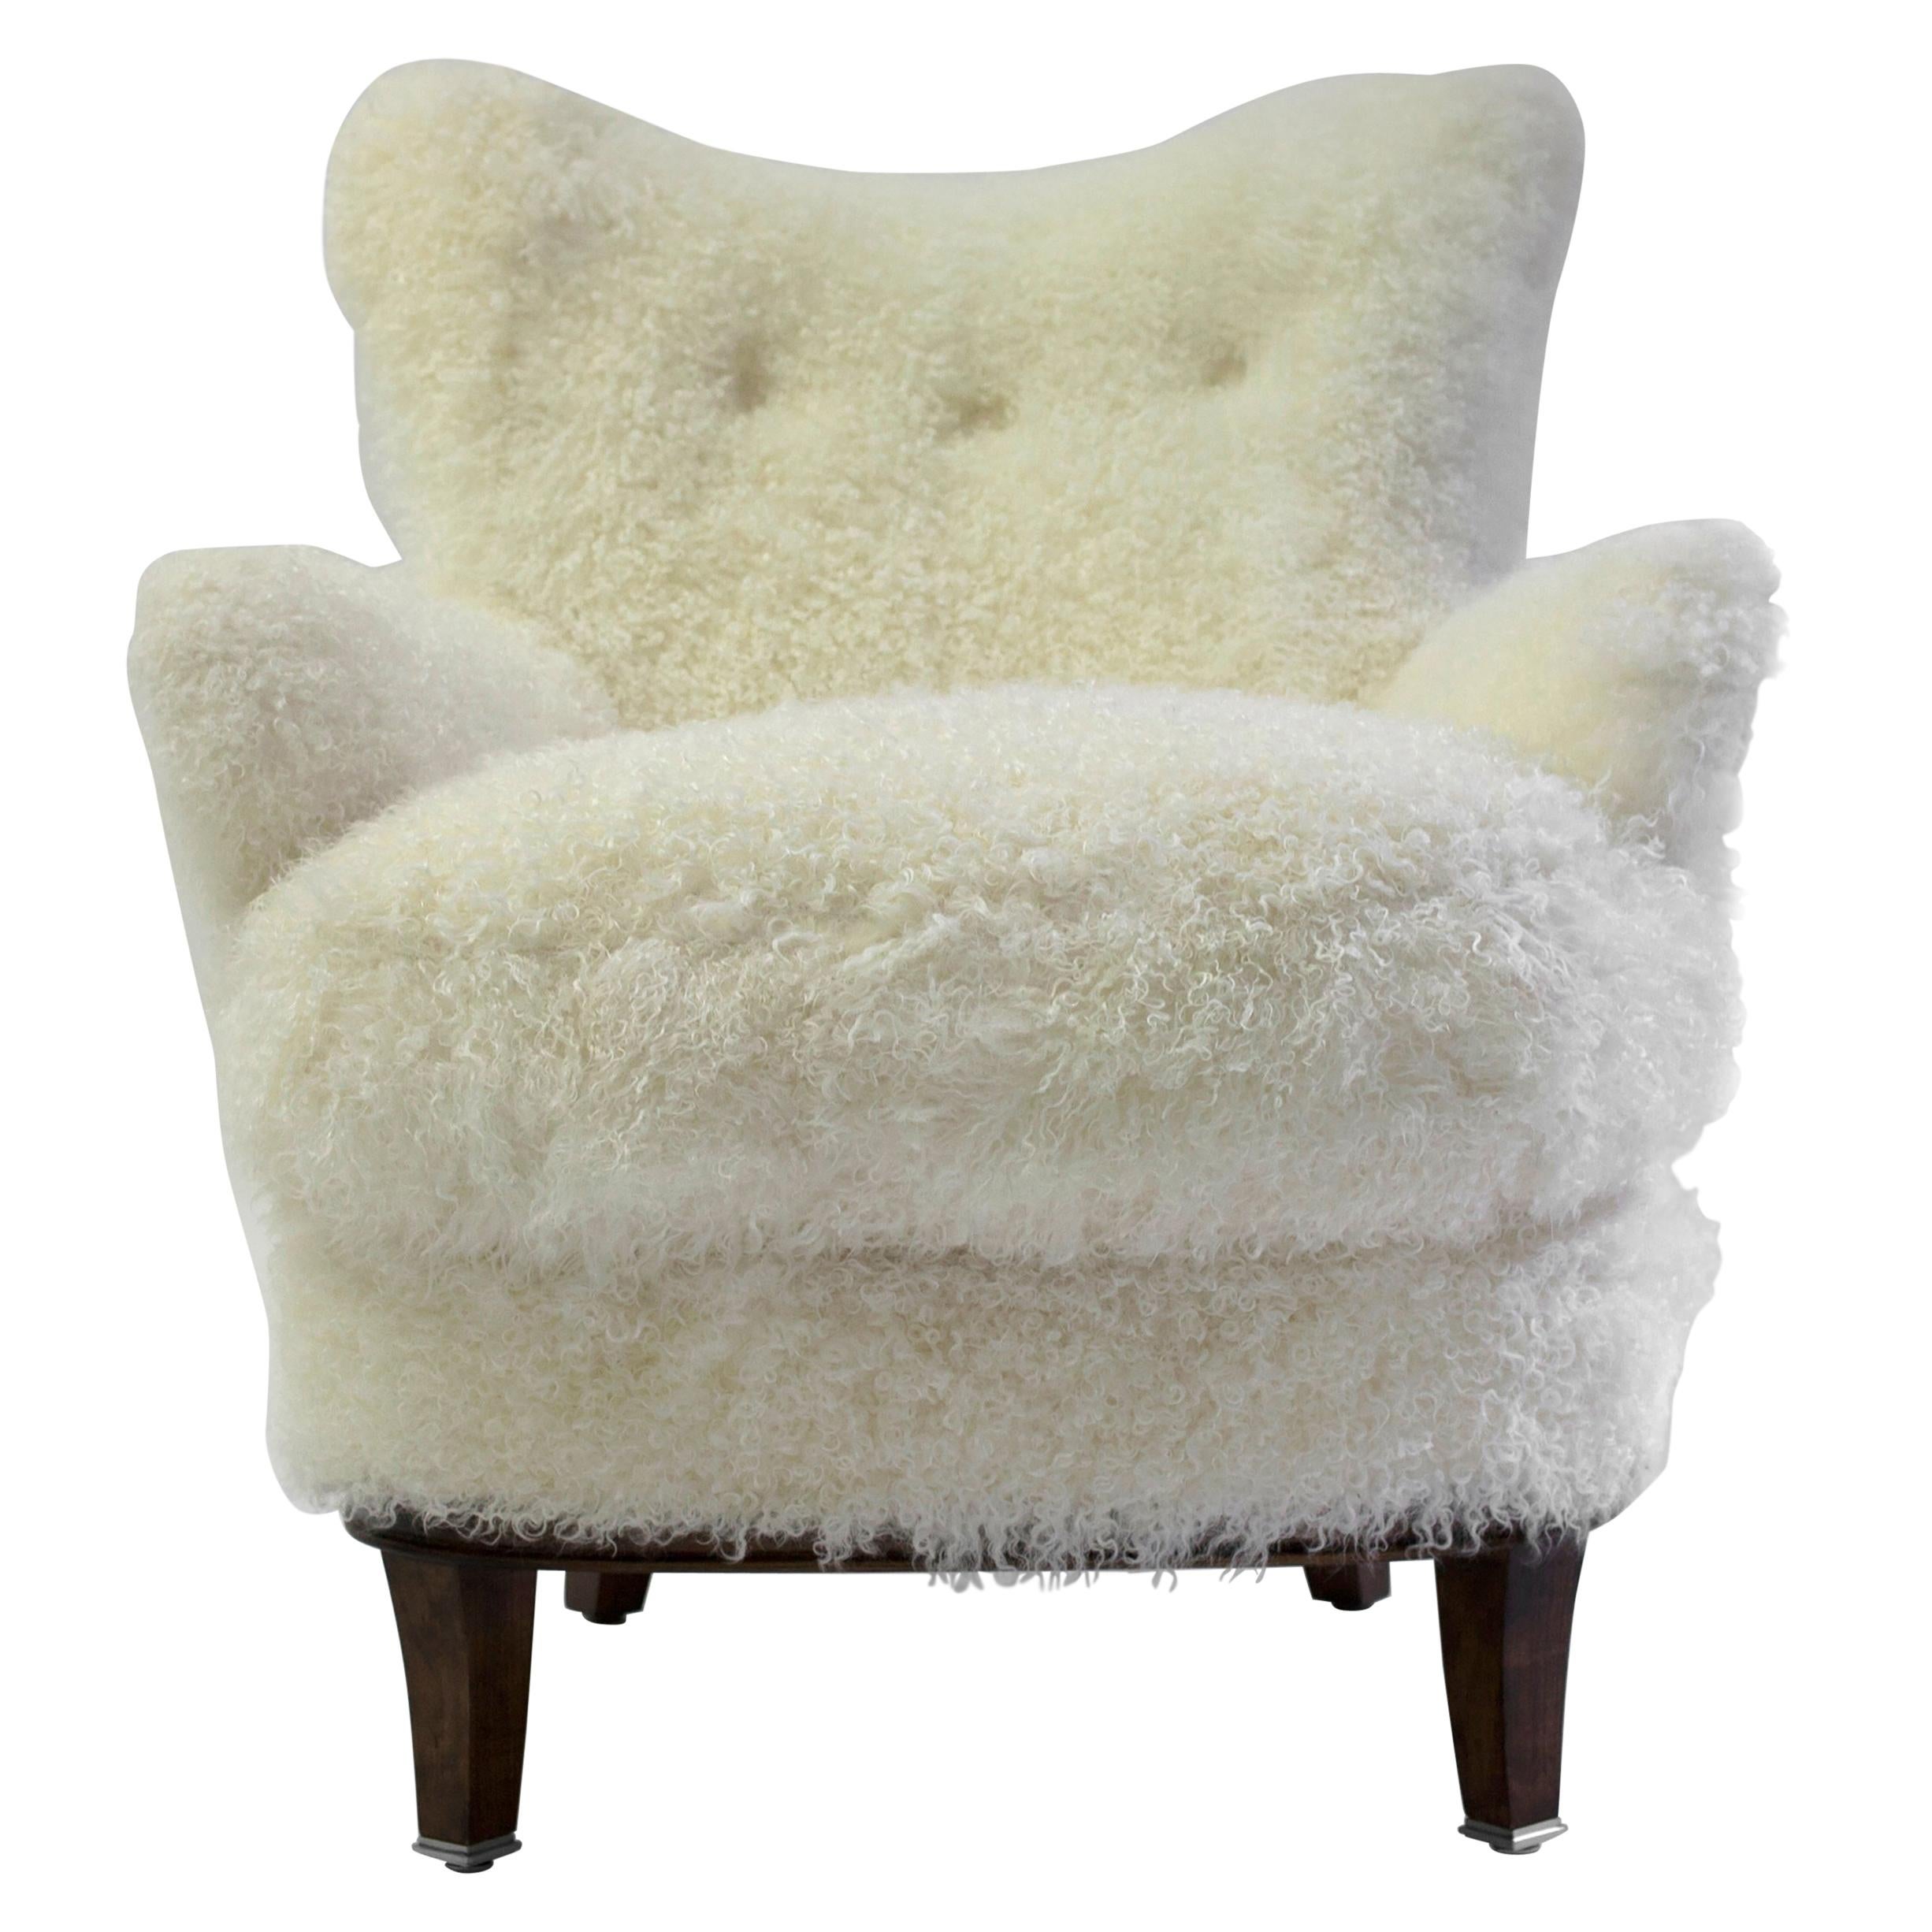 Shearling Covered Shaped Back Chair with Wood Base and Legs with Metal Cap Feet  For Sale